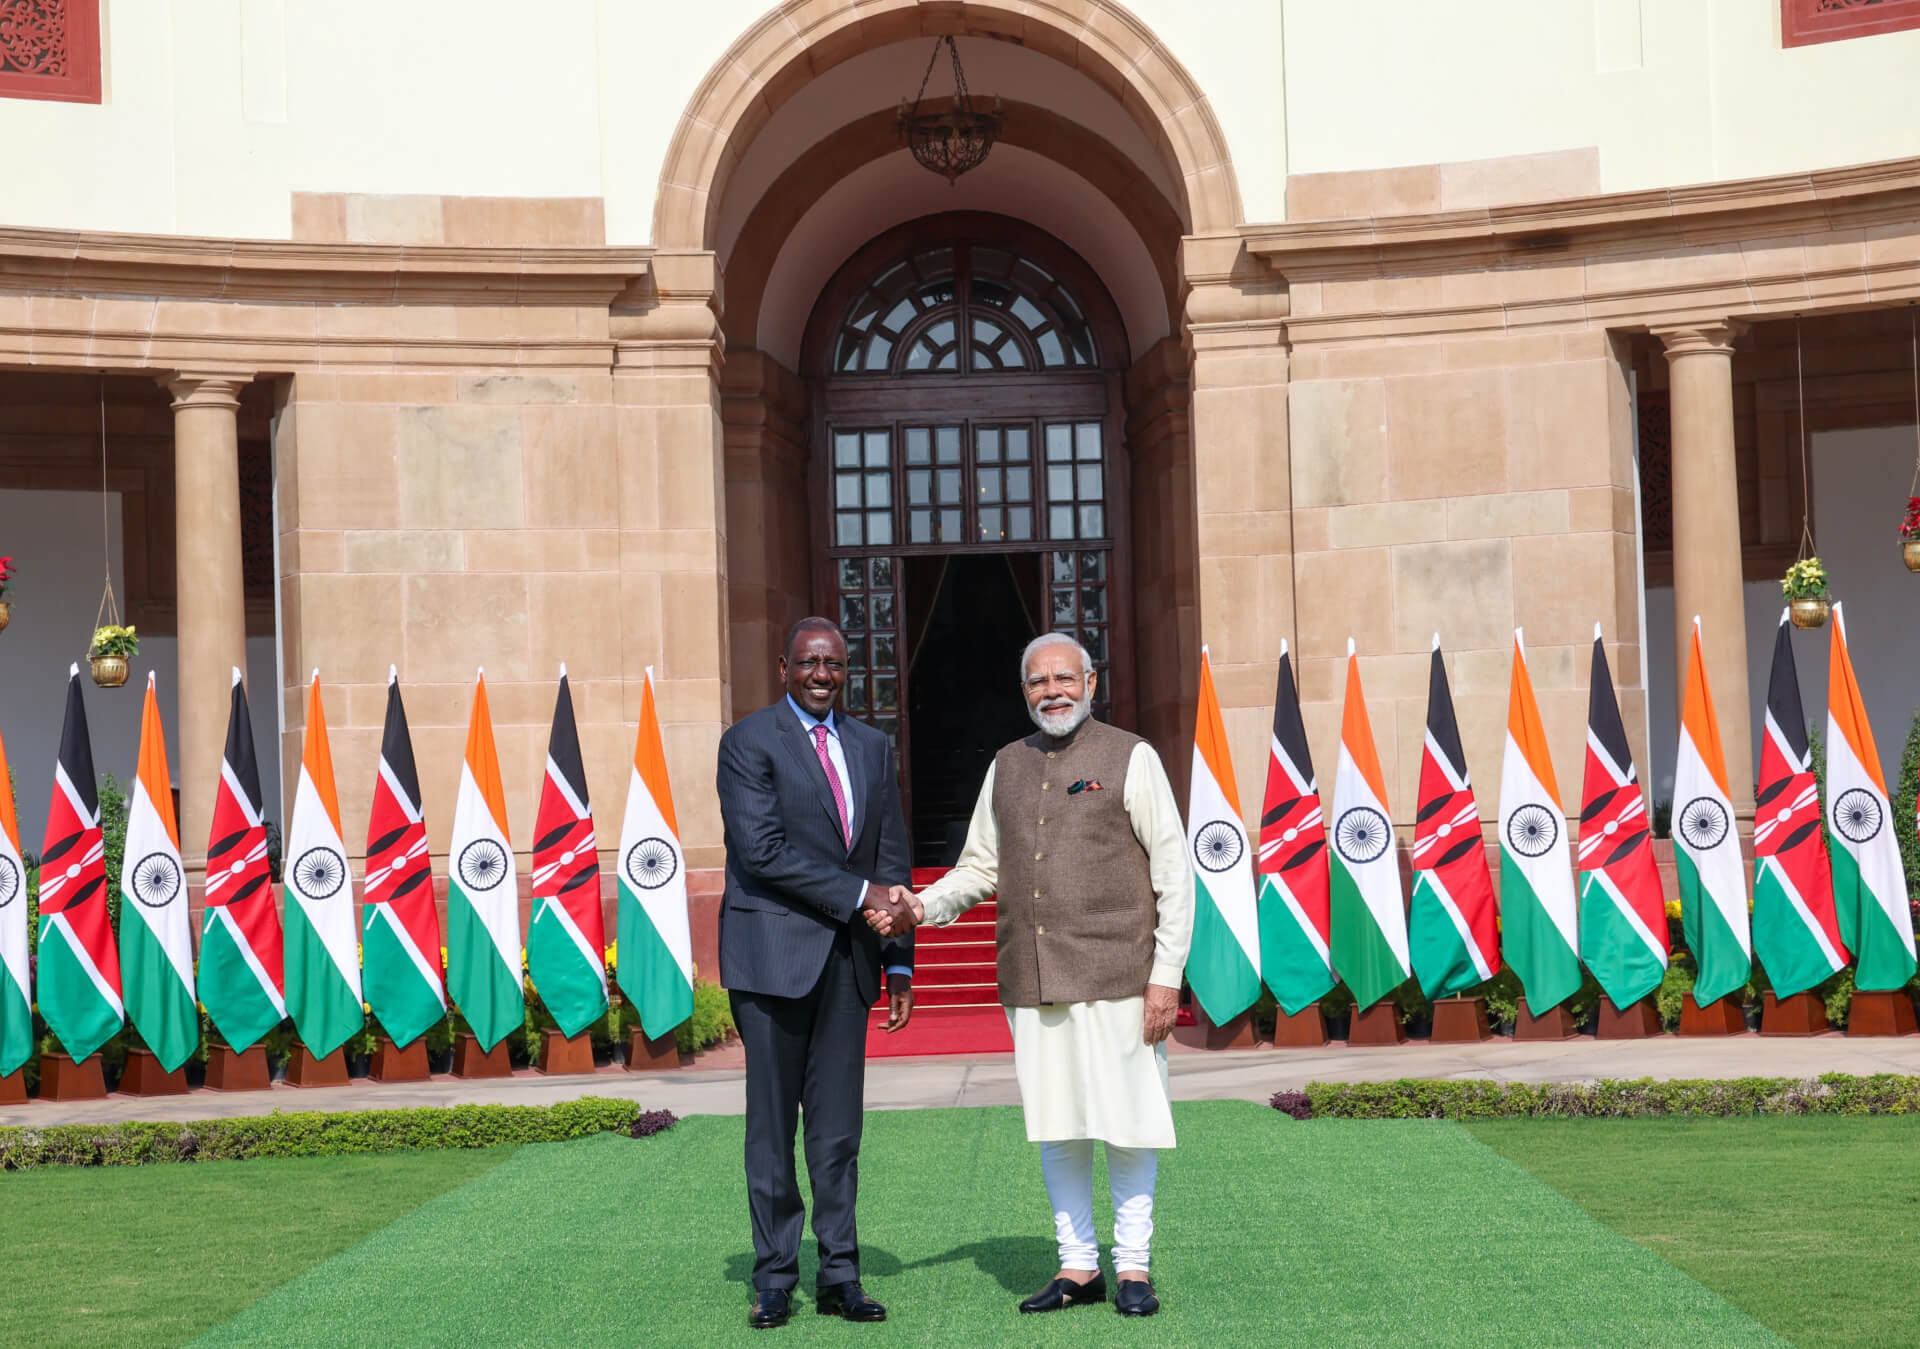 India Extends $250 Million in Aid to Kenya, Signs 5 Bilateral Agreements to Bolster Ties